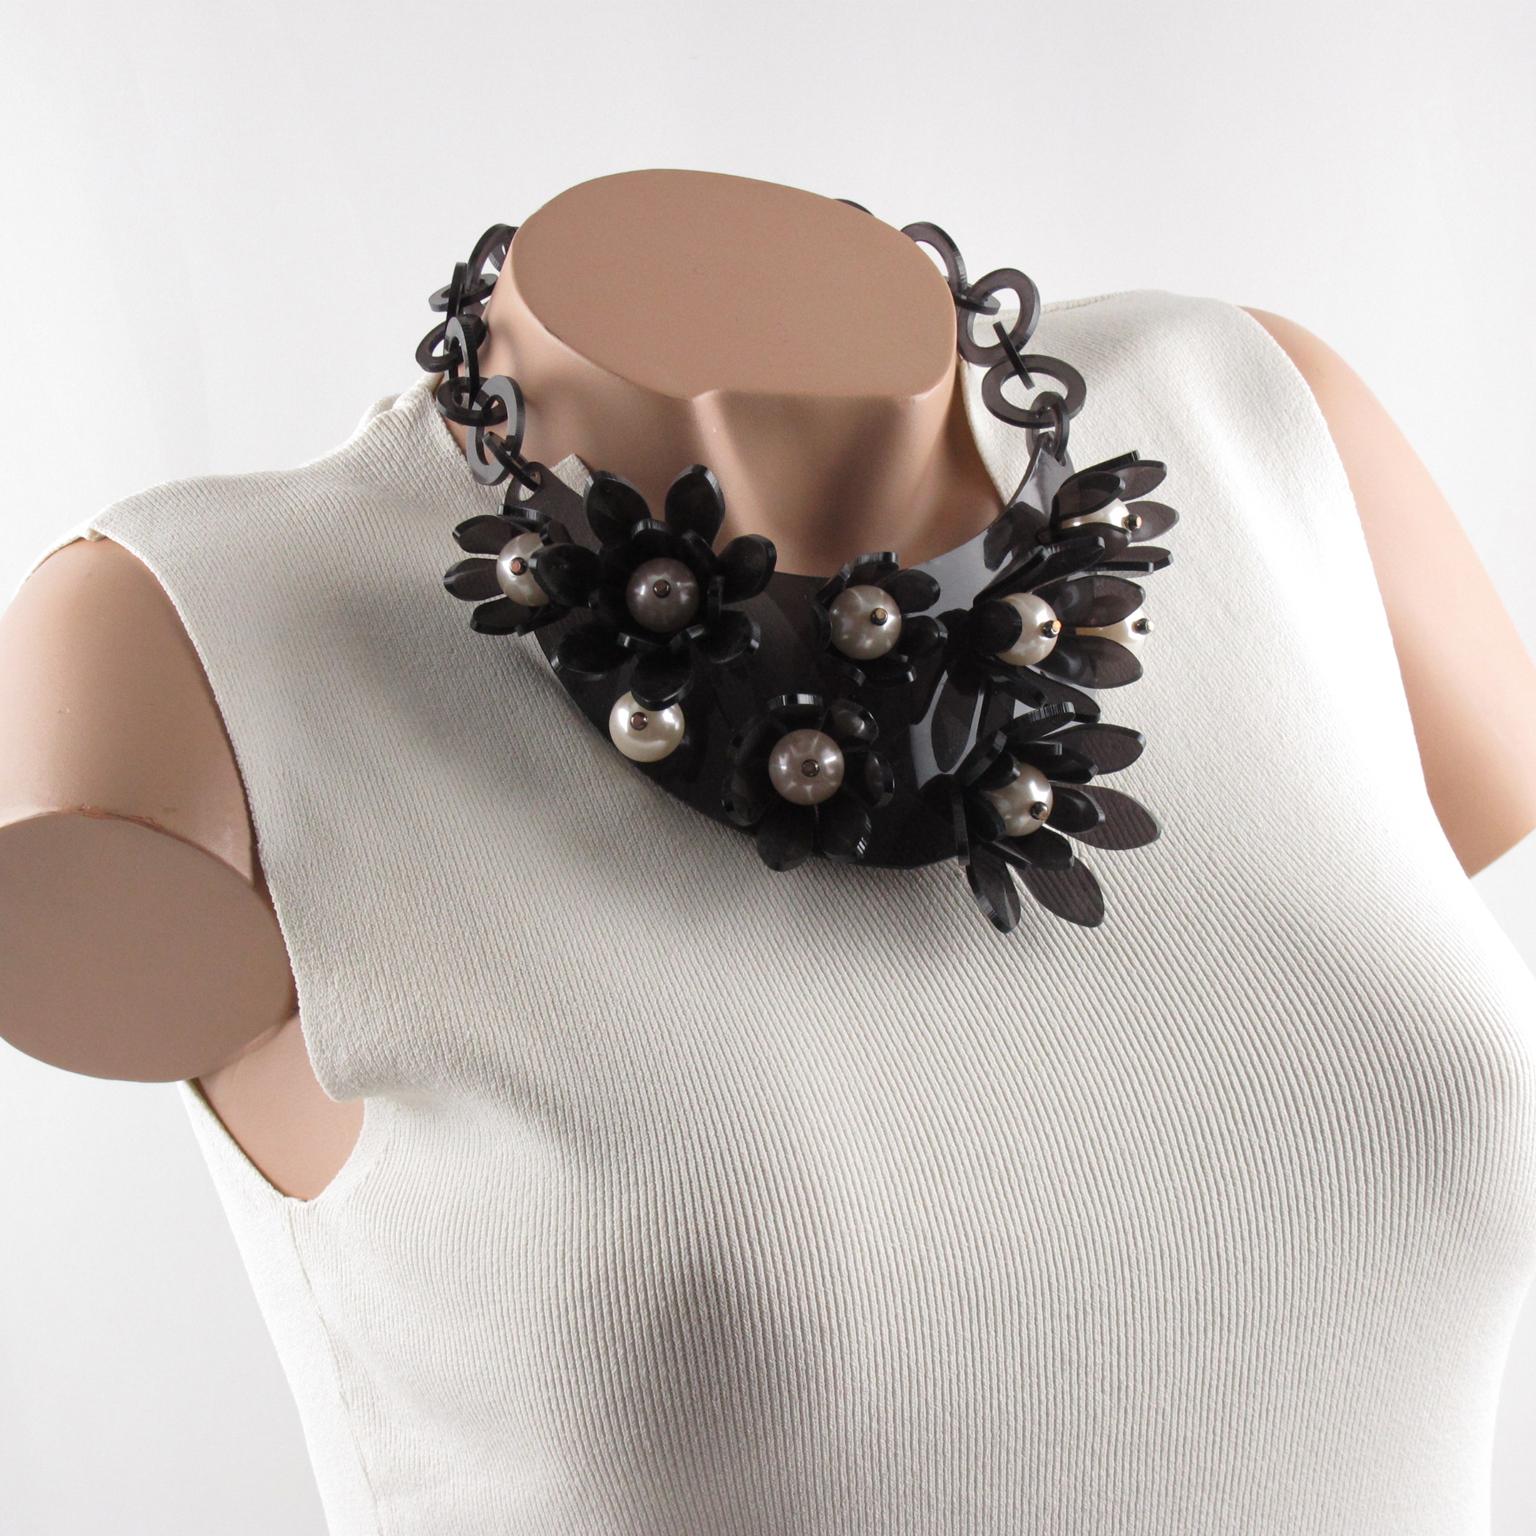 This impressive transparent anthracite gray Lucite or Plexiglass bib choker necklace was crafted by Italian designer Manoa2 (Milano 1980 - 1985). The collar shape has a large curved bib topped with dimensional flowers and huge pearl-like beads. The